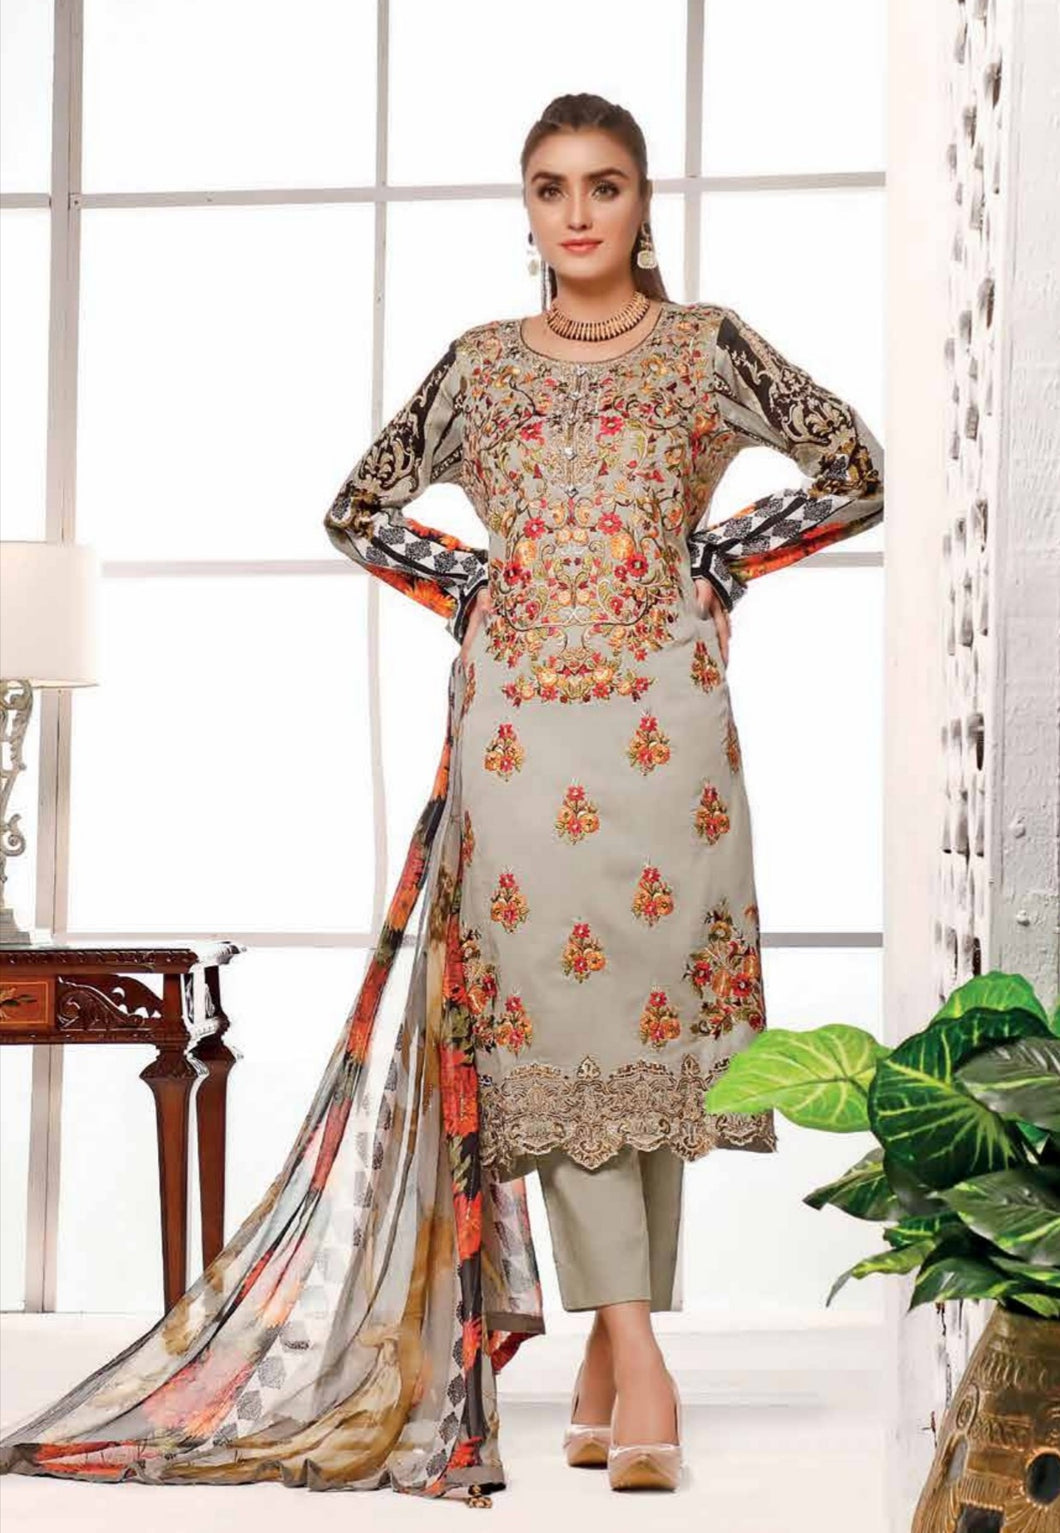 3 pc Semi-stitched Embroidered Jacquard Lawn Suit by Motis